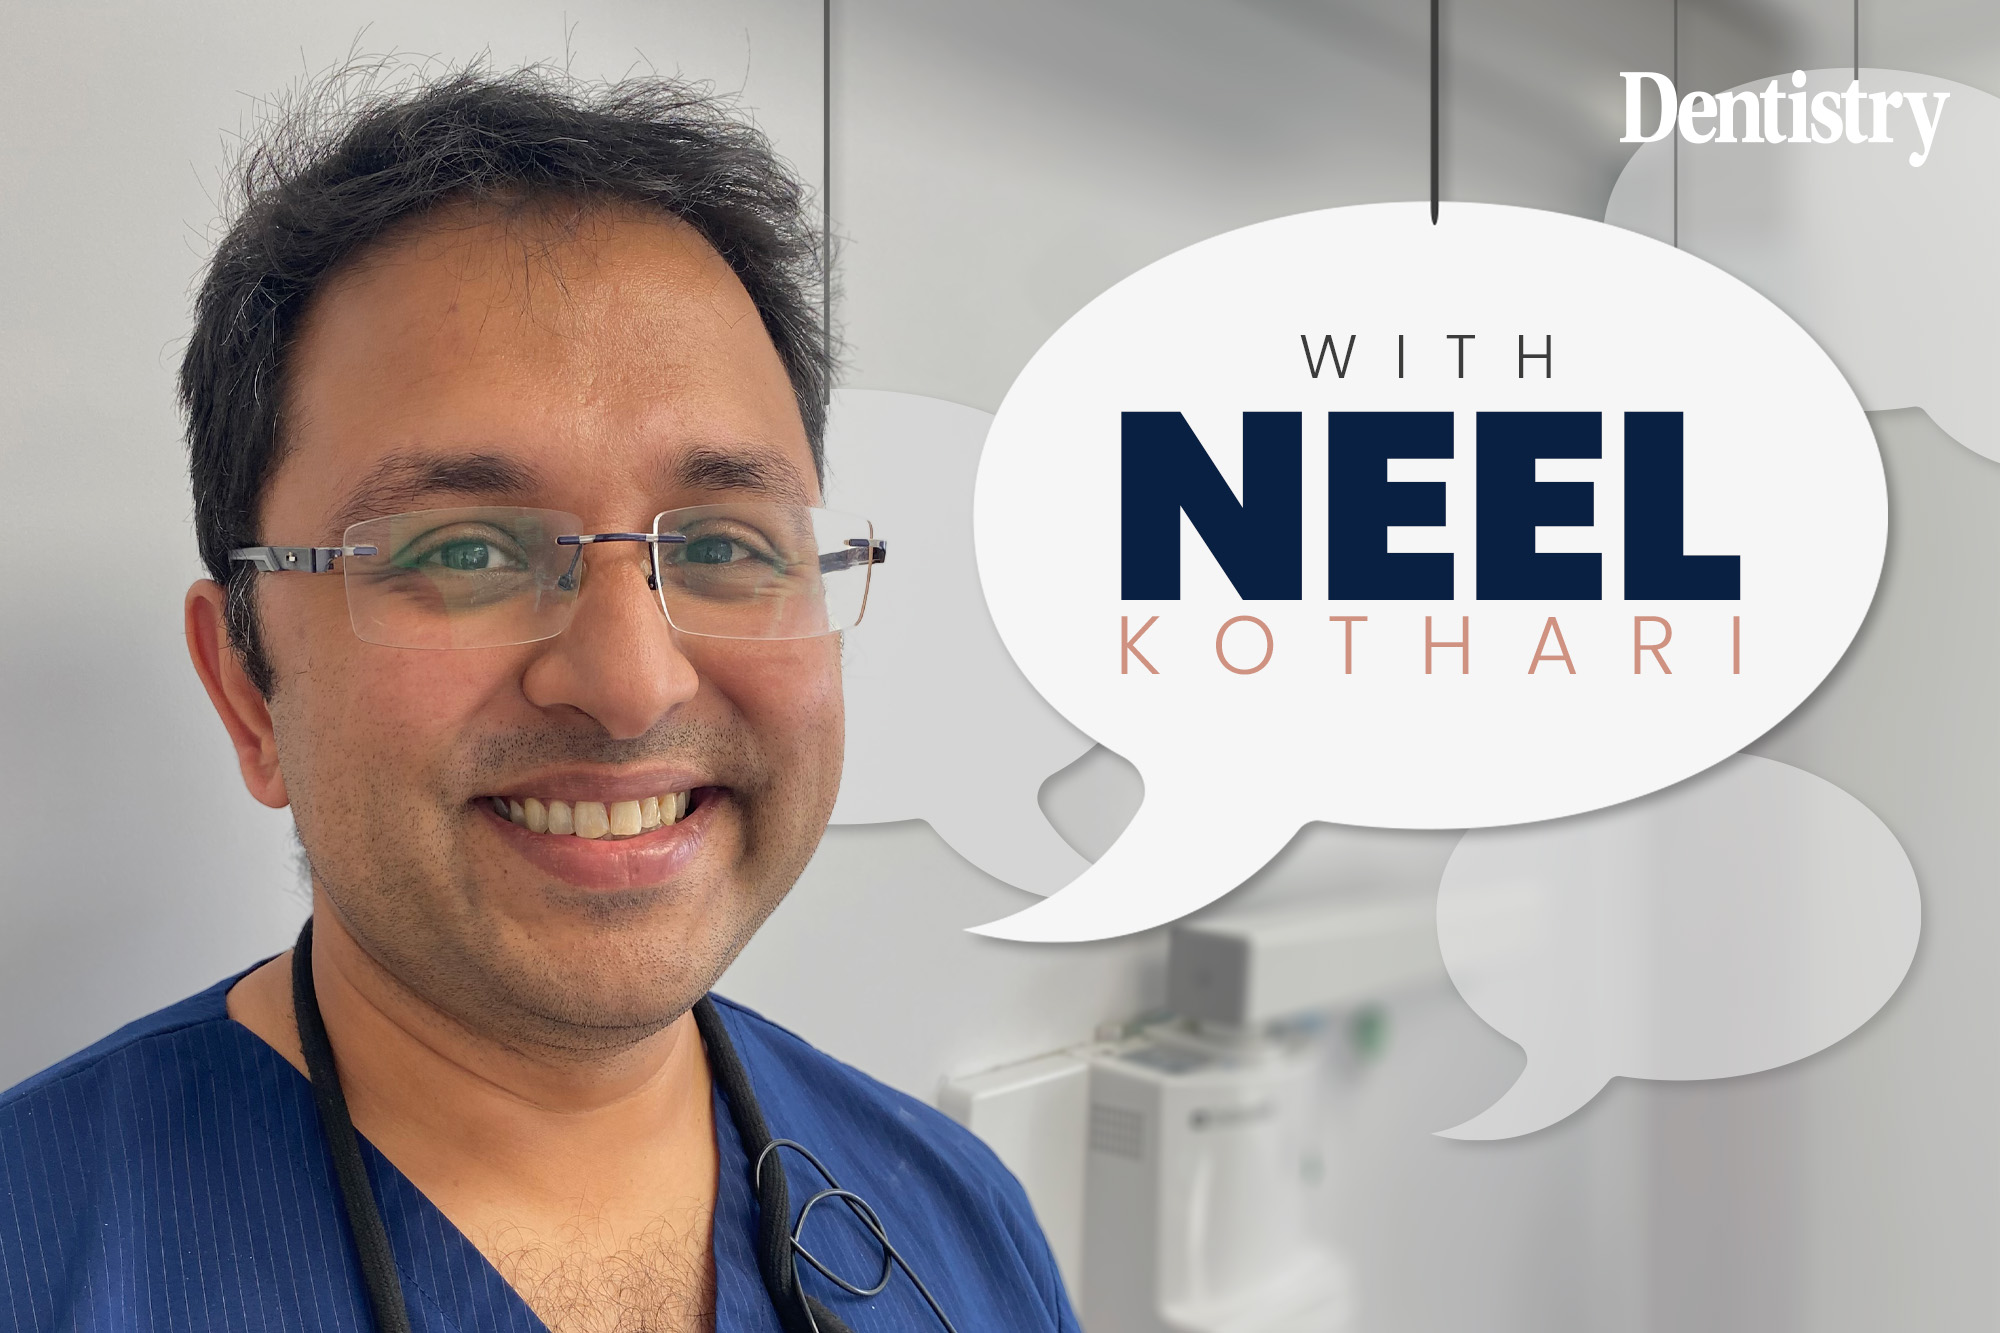 Neel Kothari discusses the implications of blue on blue GDC referrals and how the very nature of dentistry and its complex regulations can foster them. 